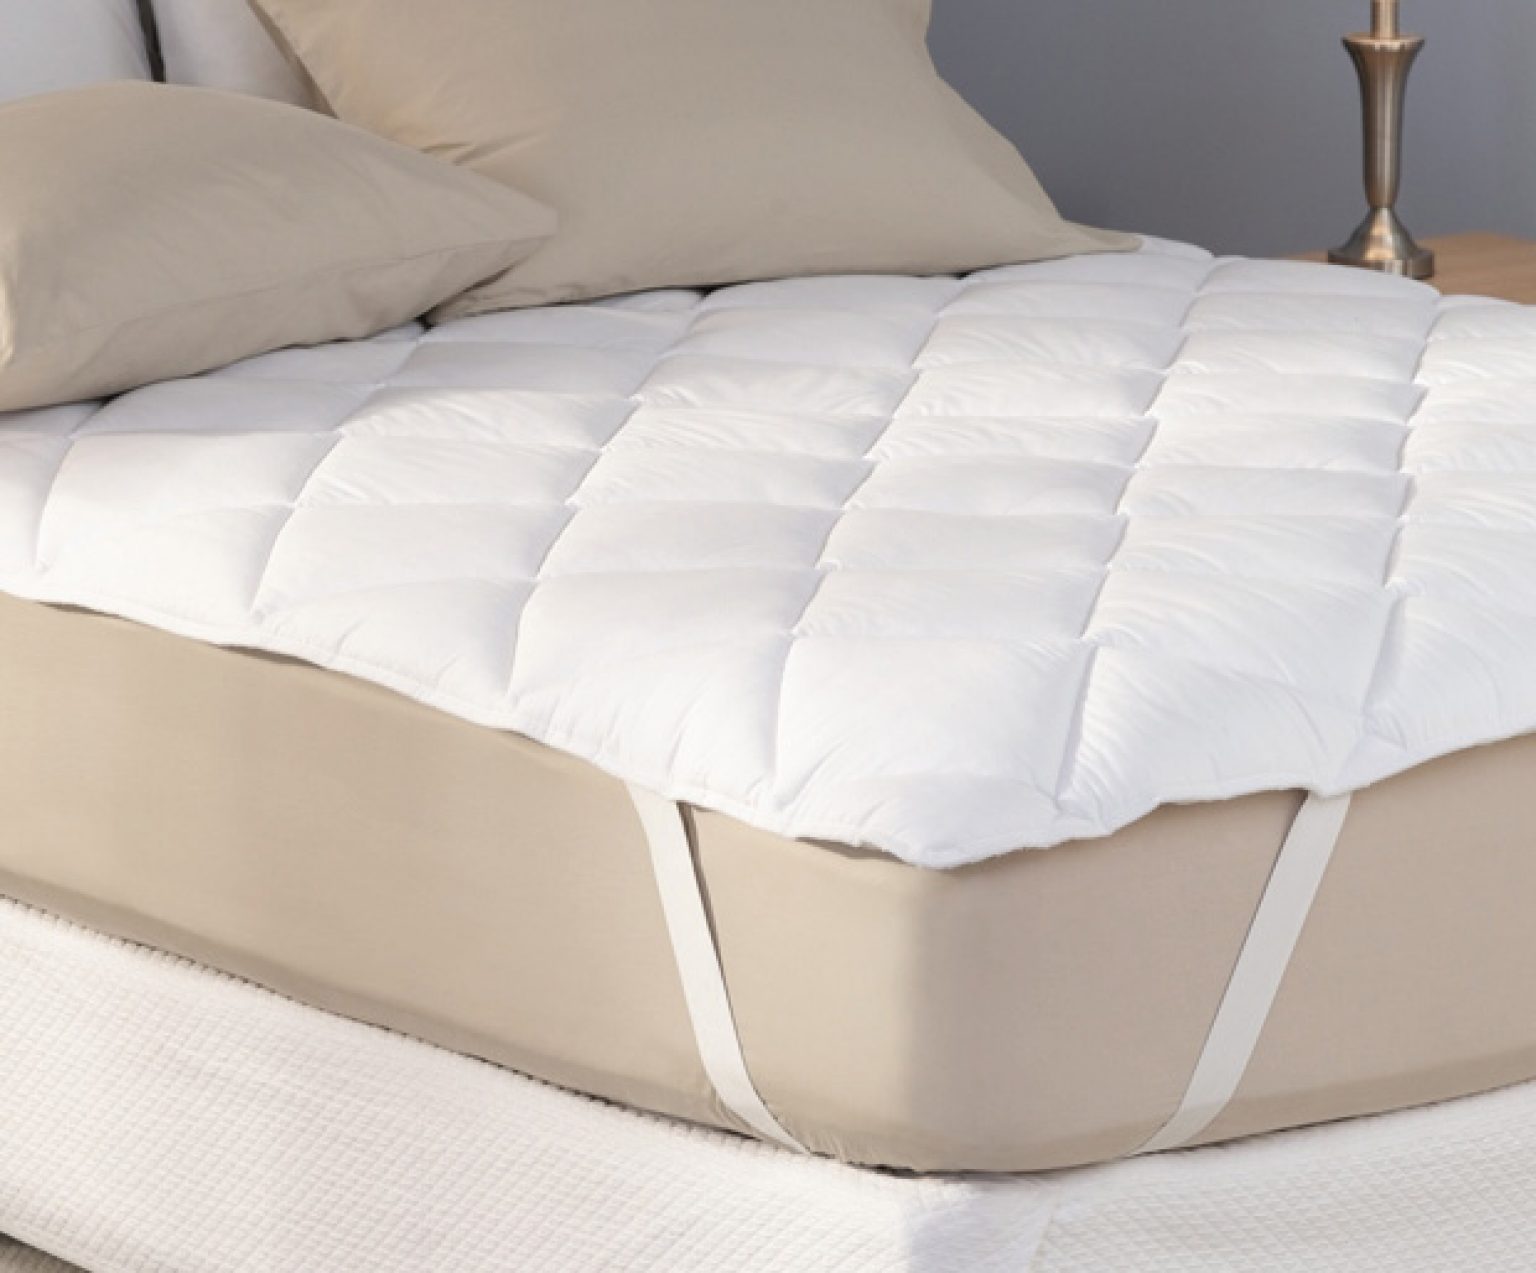 How To Keep A Mattress Pad From Sliding